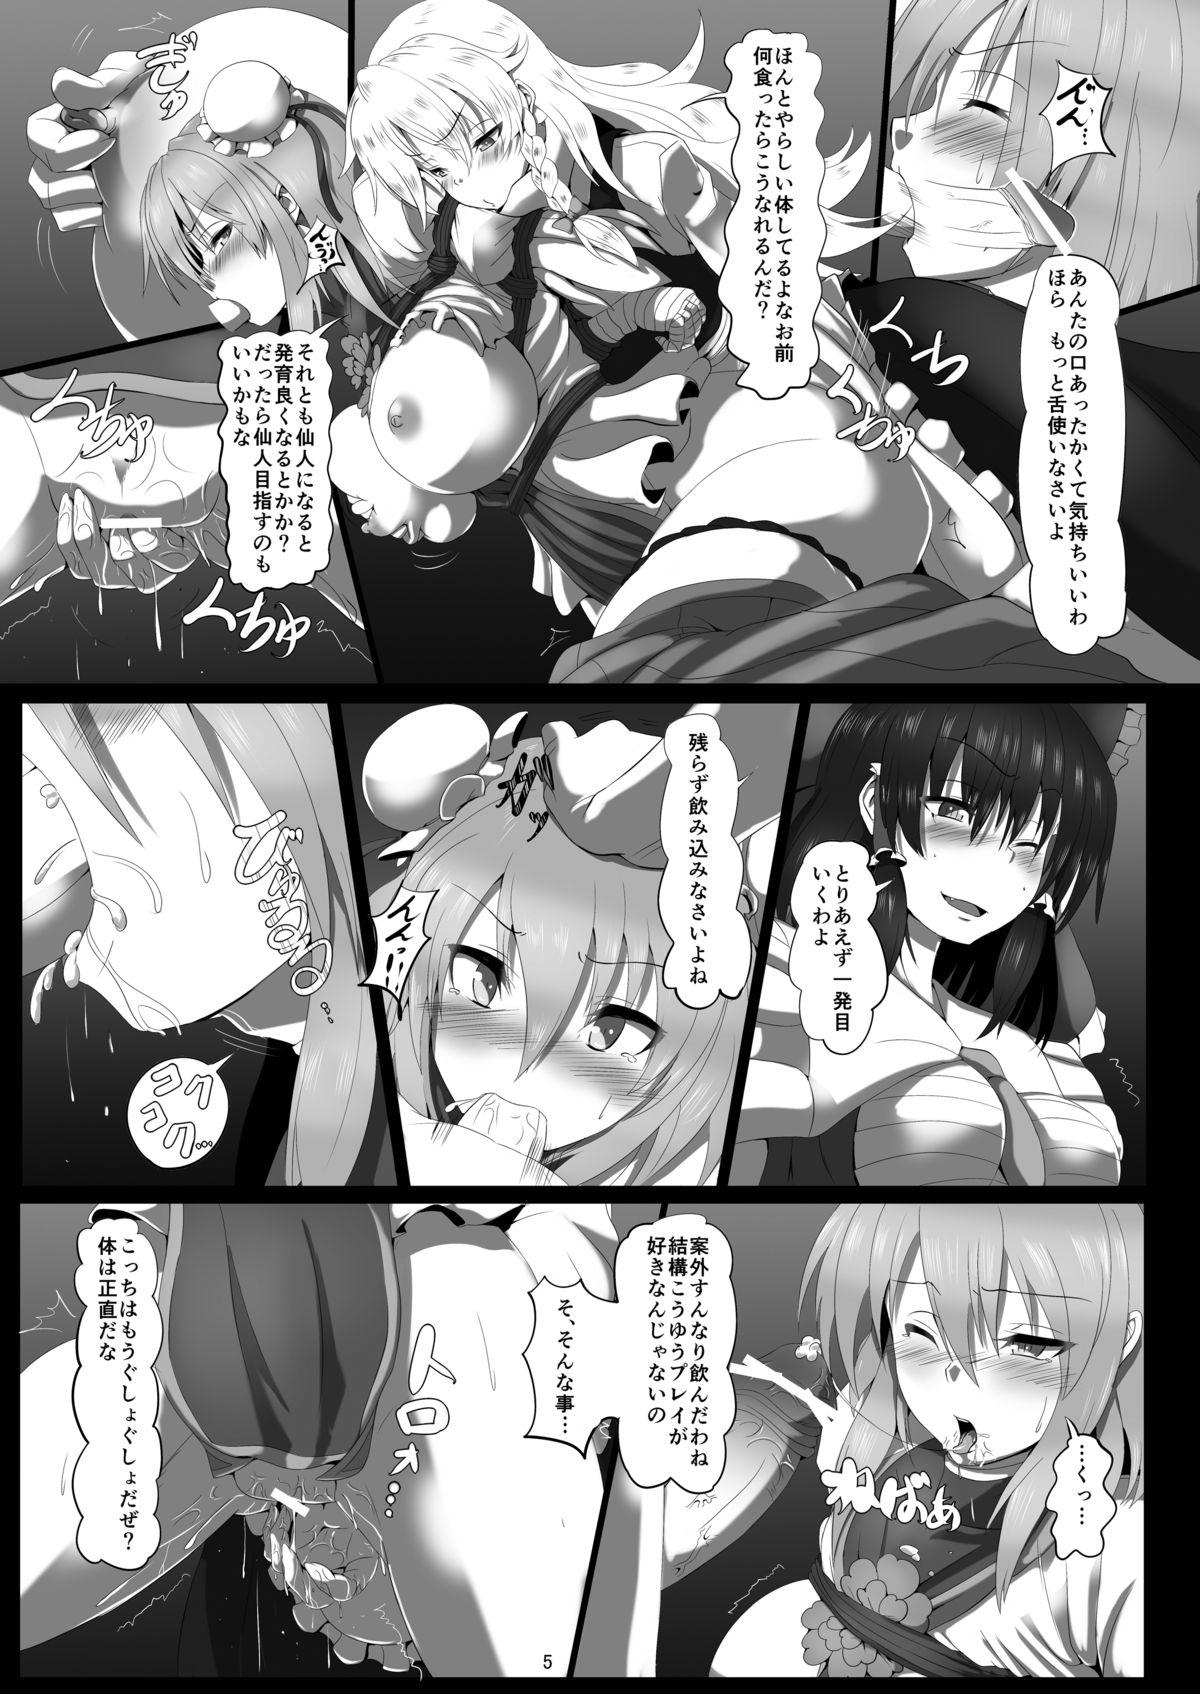 Gostoso Kasen no Kankei - Touhou project Office Fuck - Page 6